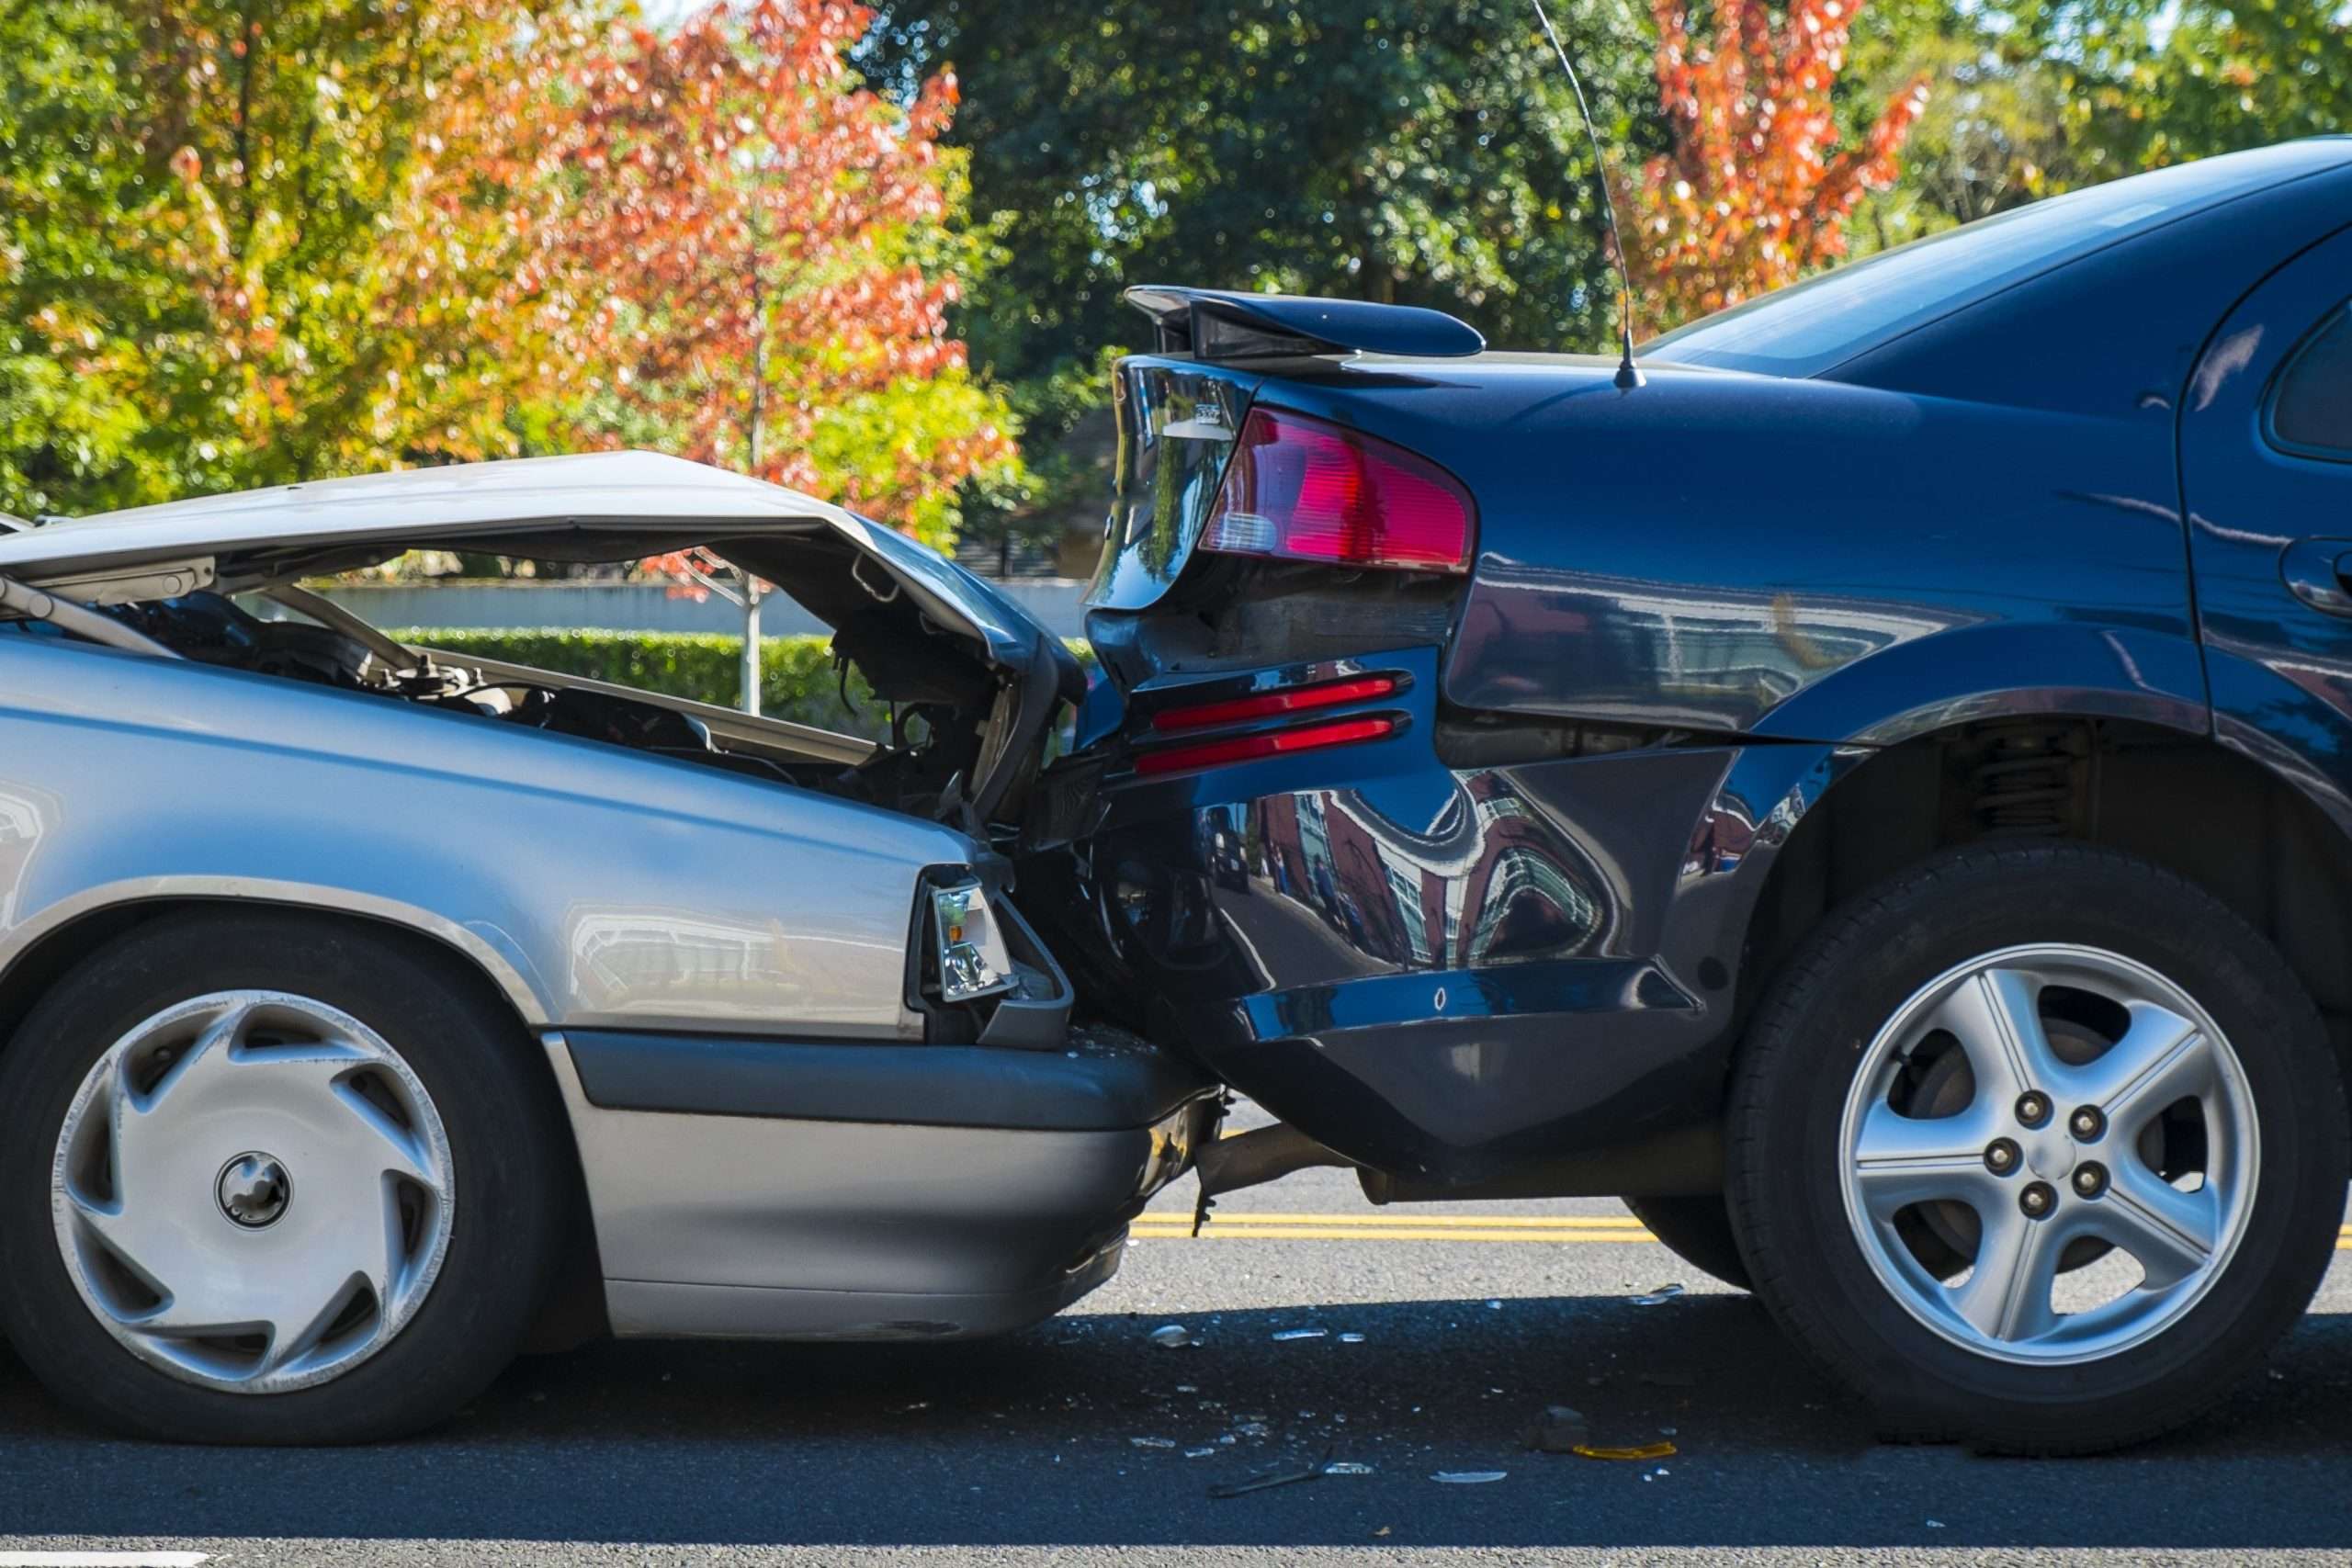 Protecting Yourself After a Collision: What You Need to Know While You Are Selecting the Right Injury Lawyer